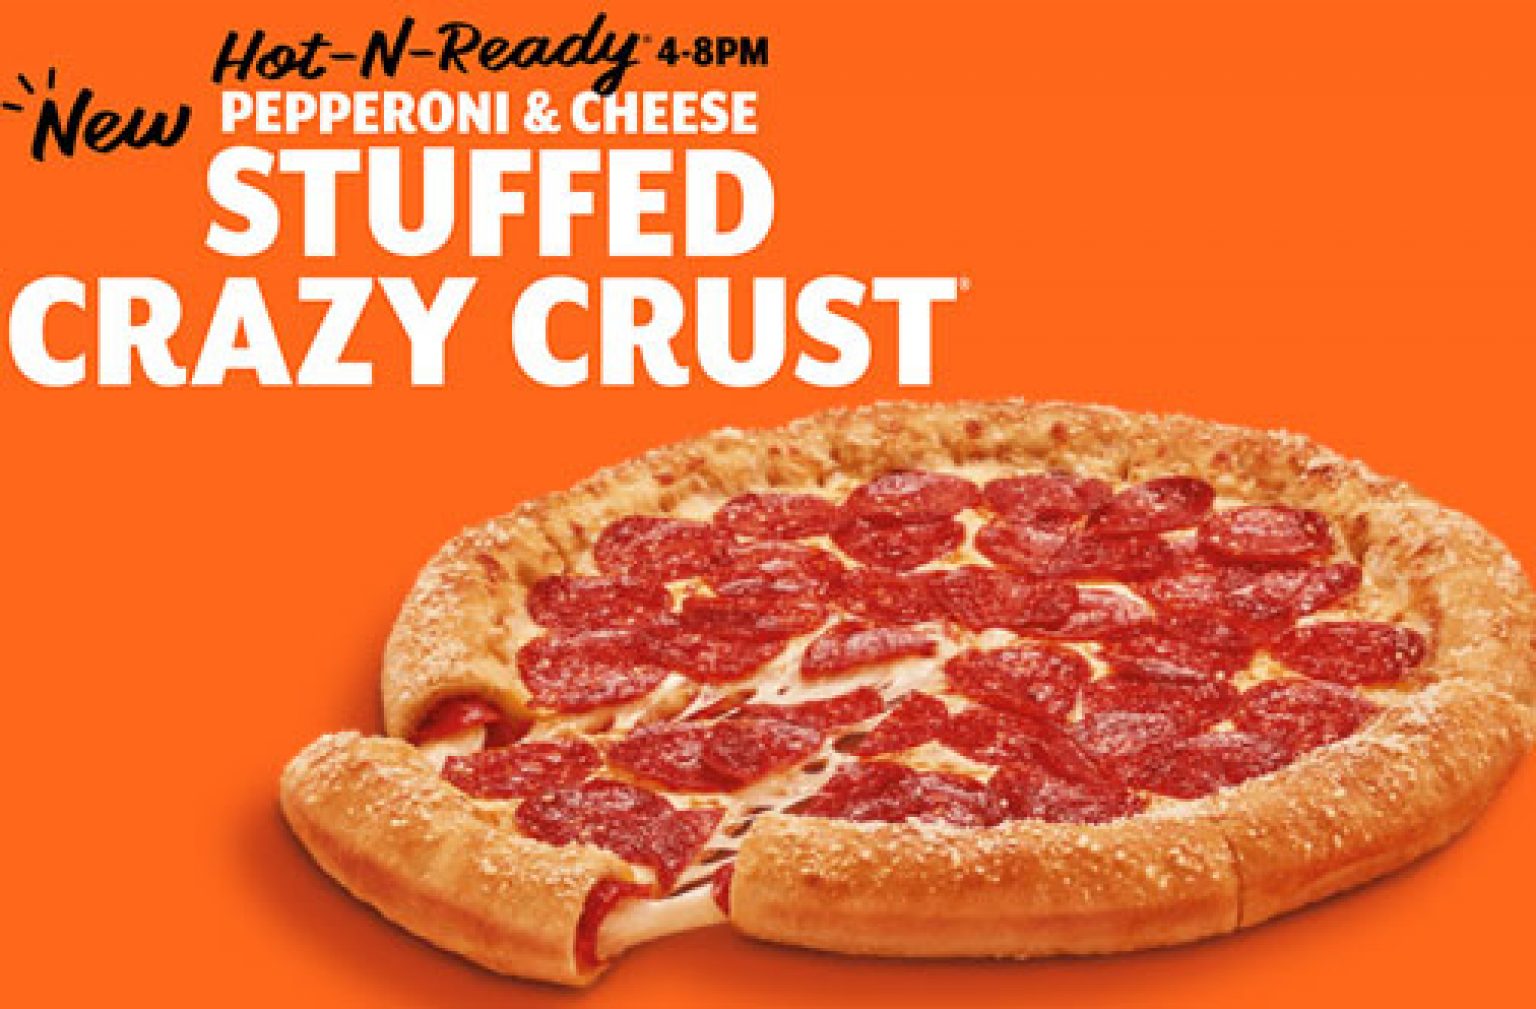 Little Caesars Coupons & Deals NEW Pepperoni & Cheese Stuffed Crust